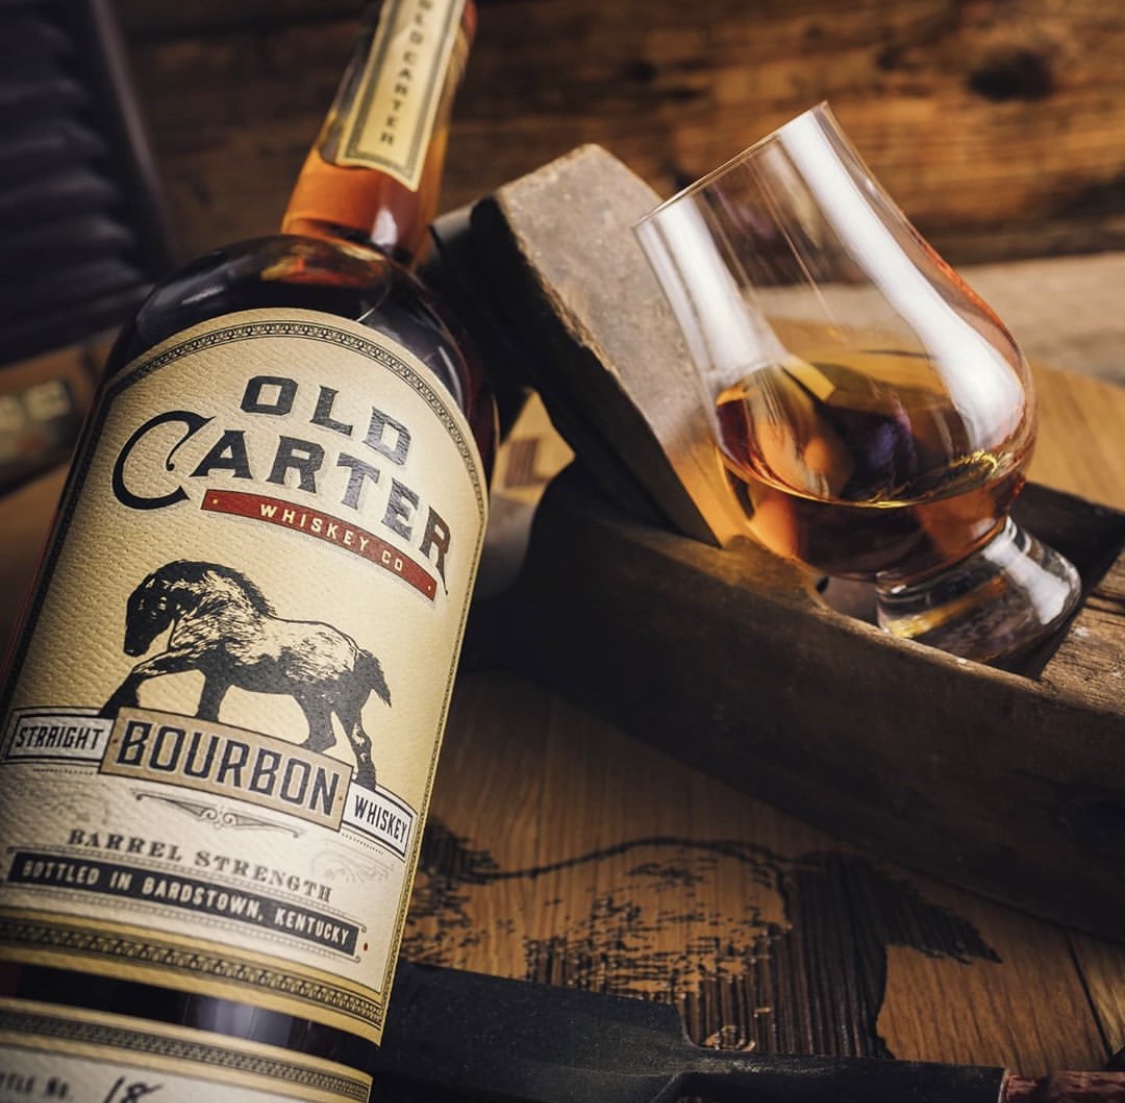 Old Carter Straight Bourbon Whiskey 2020 Batch 5 Review Whiskey Consensus